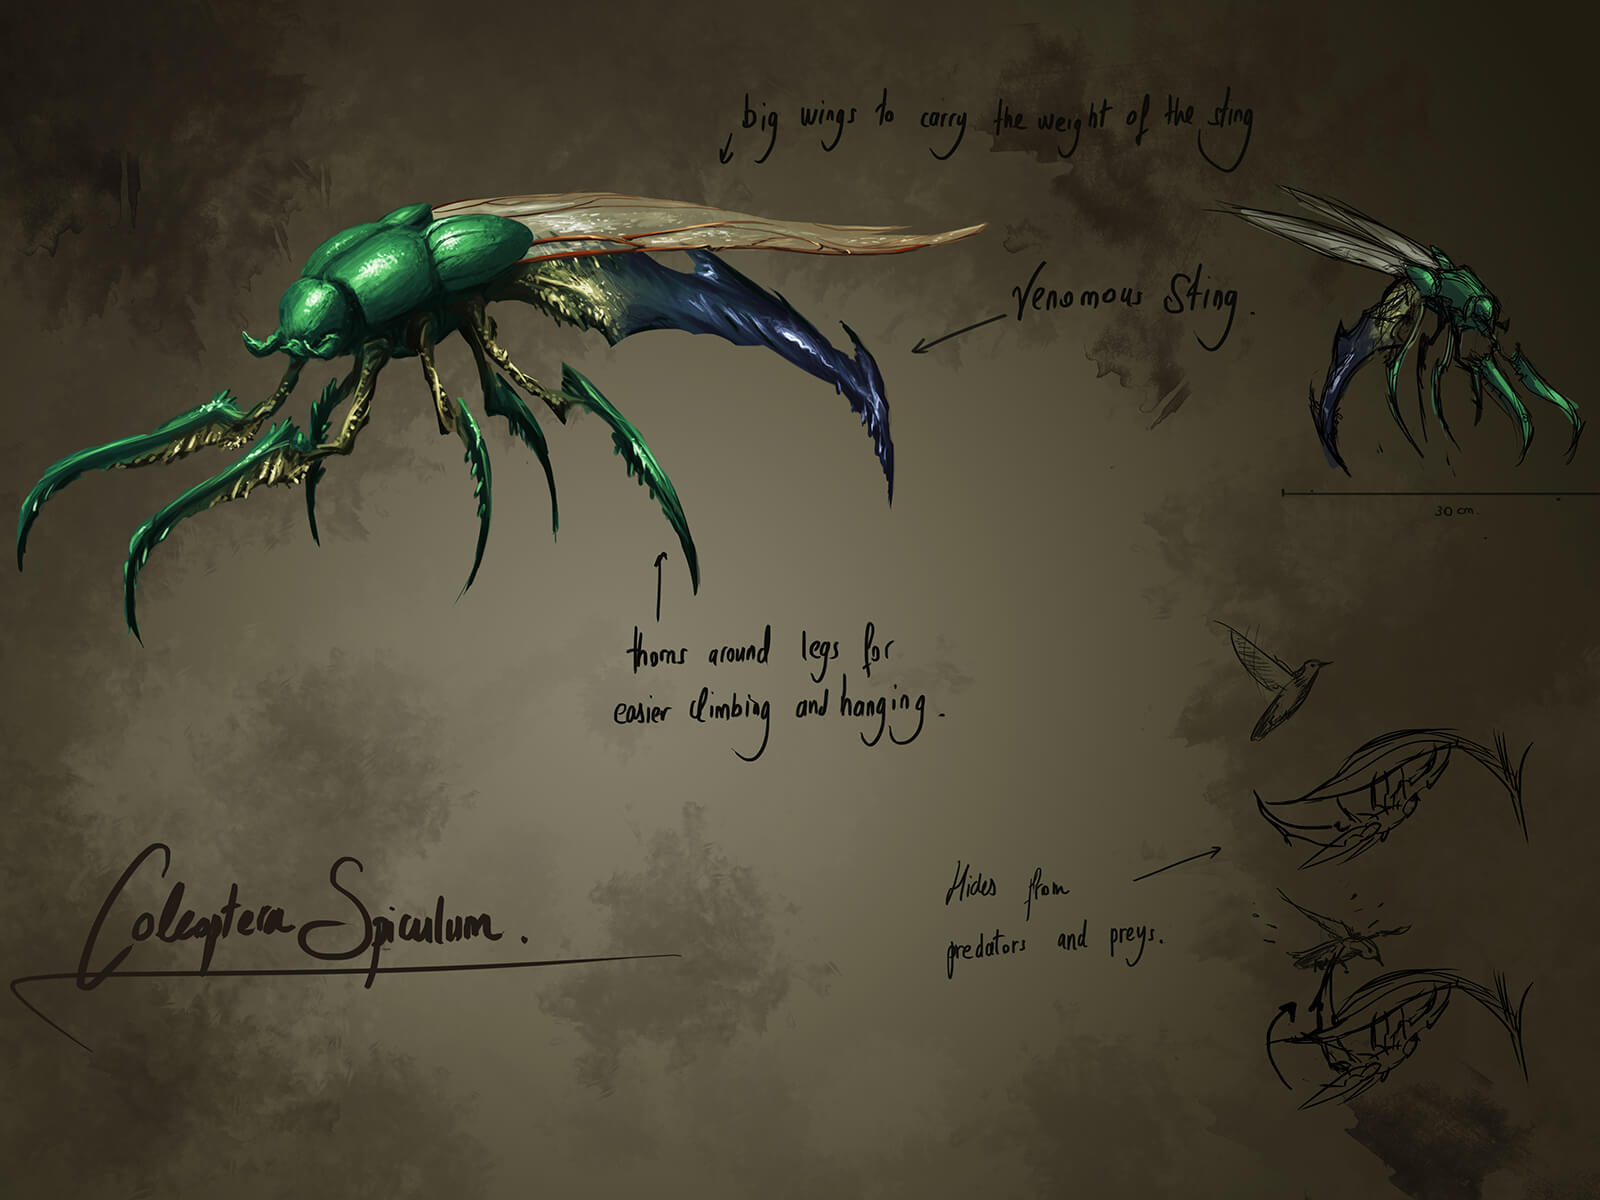 Concept art of a green, alien beetle with long, talon-like legs and a fearsome blue stinger protruding from behind.